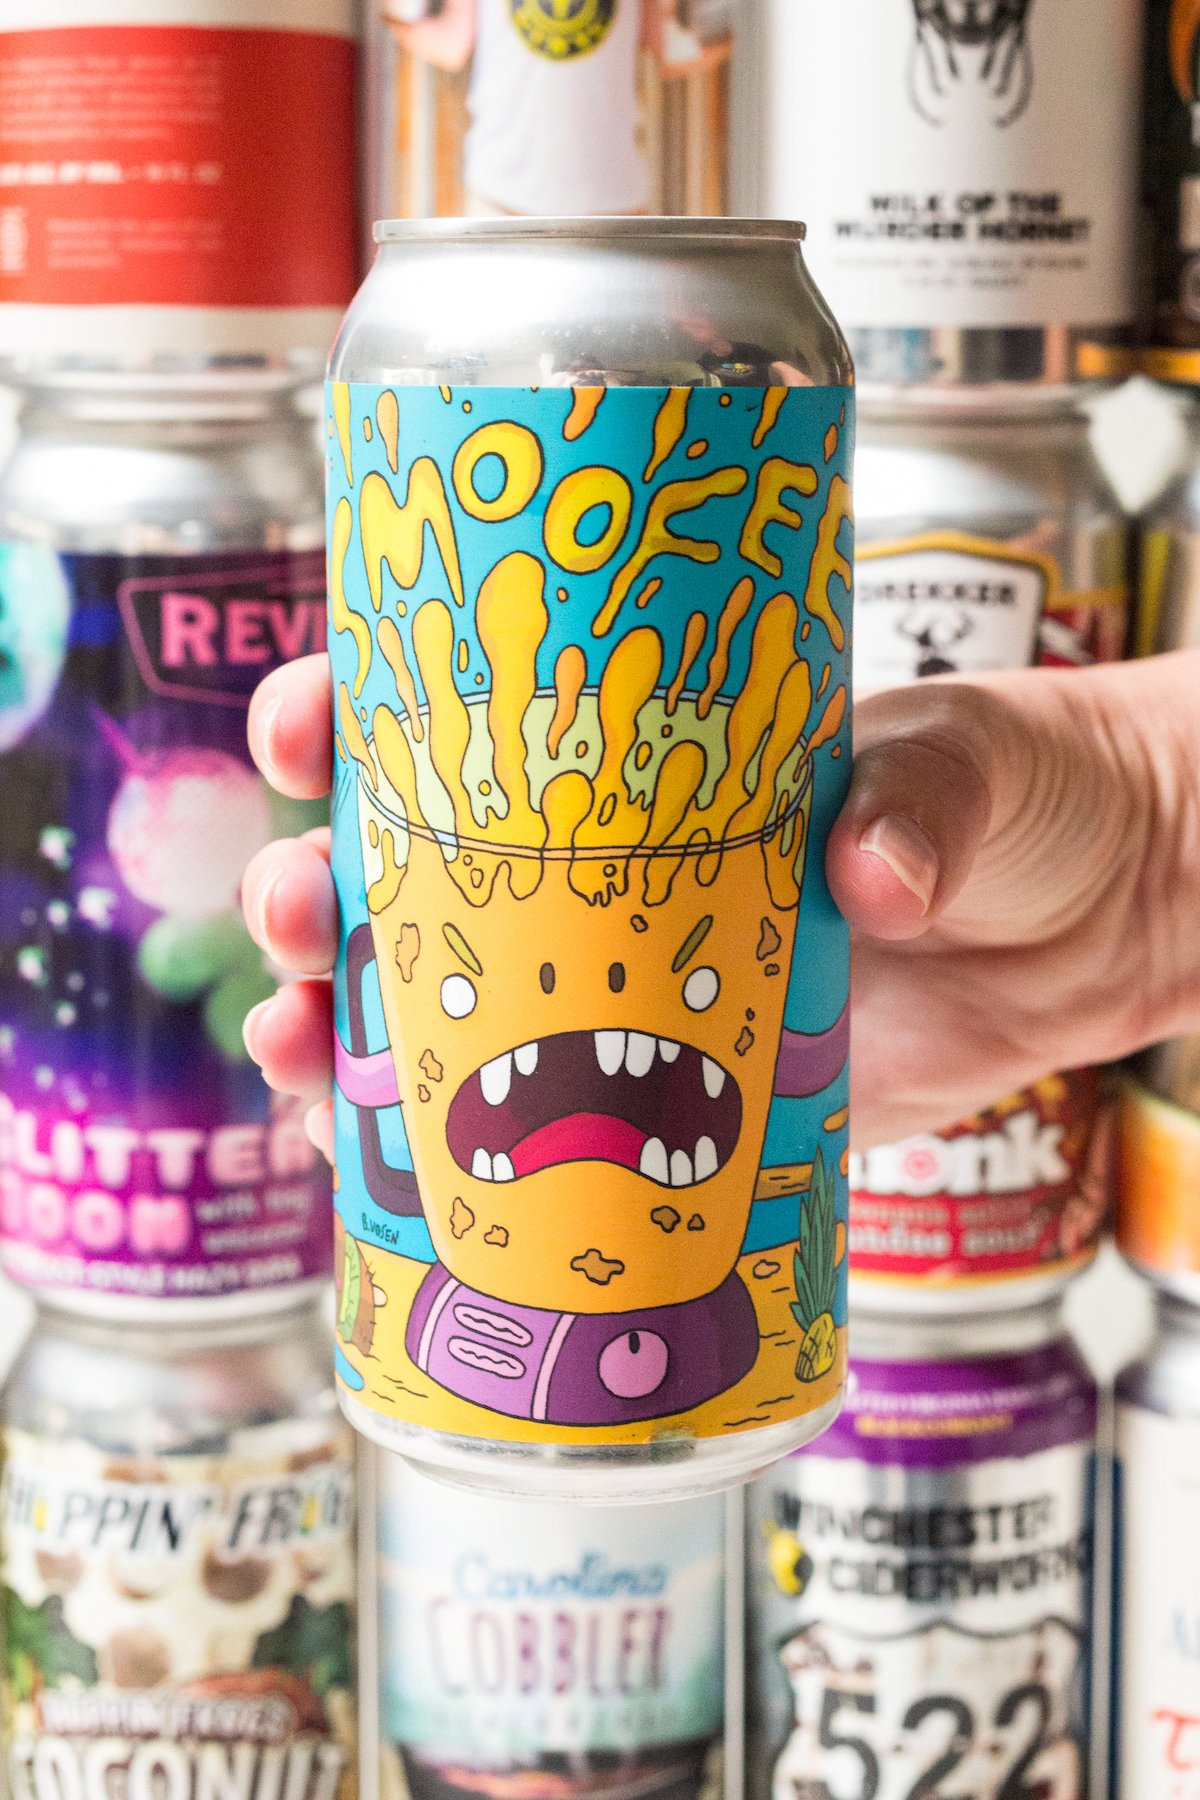 A hand holds a "Smoofee" beer in front of a wall of beers. The smoofee beer's label features a blender with eyes and a mouth full of orange liquid.